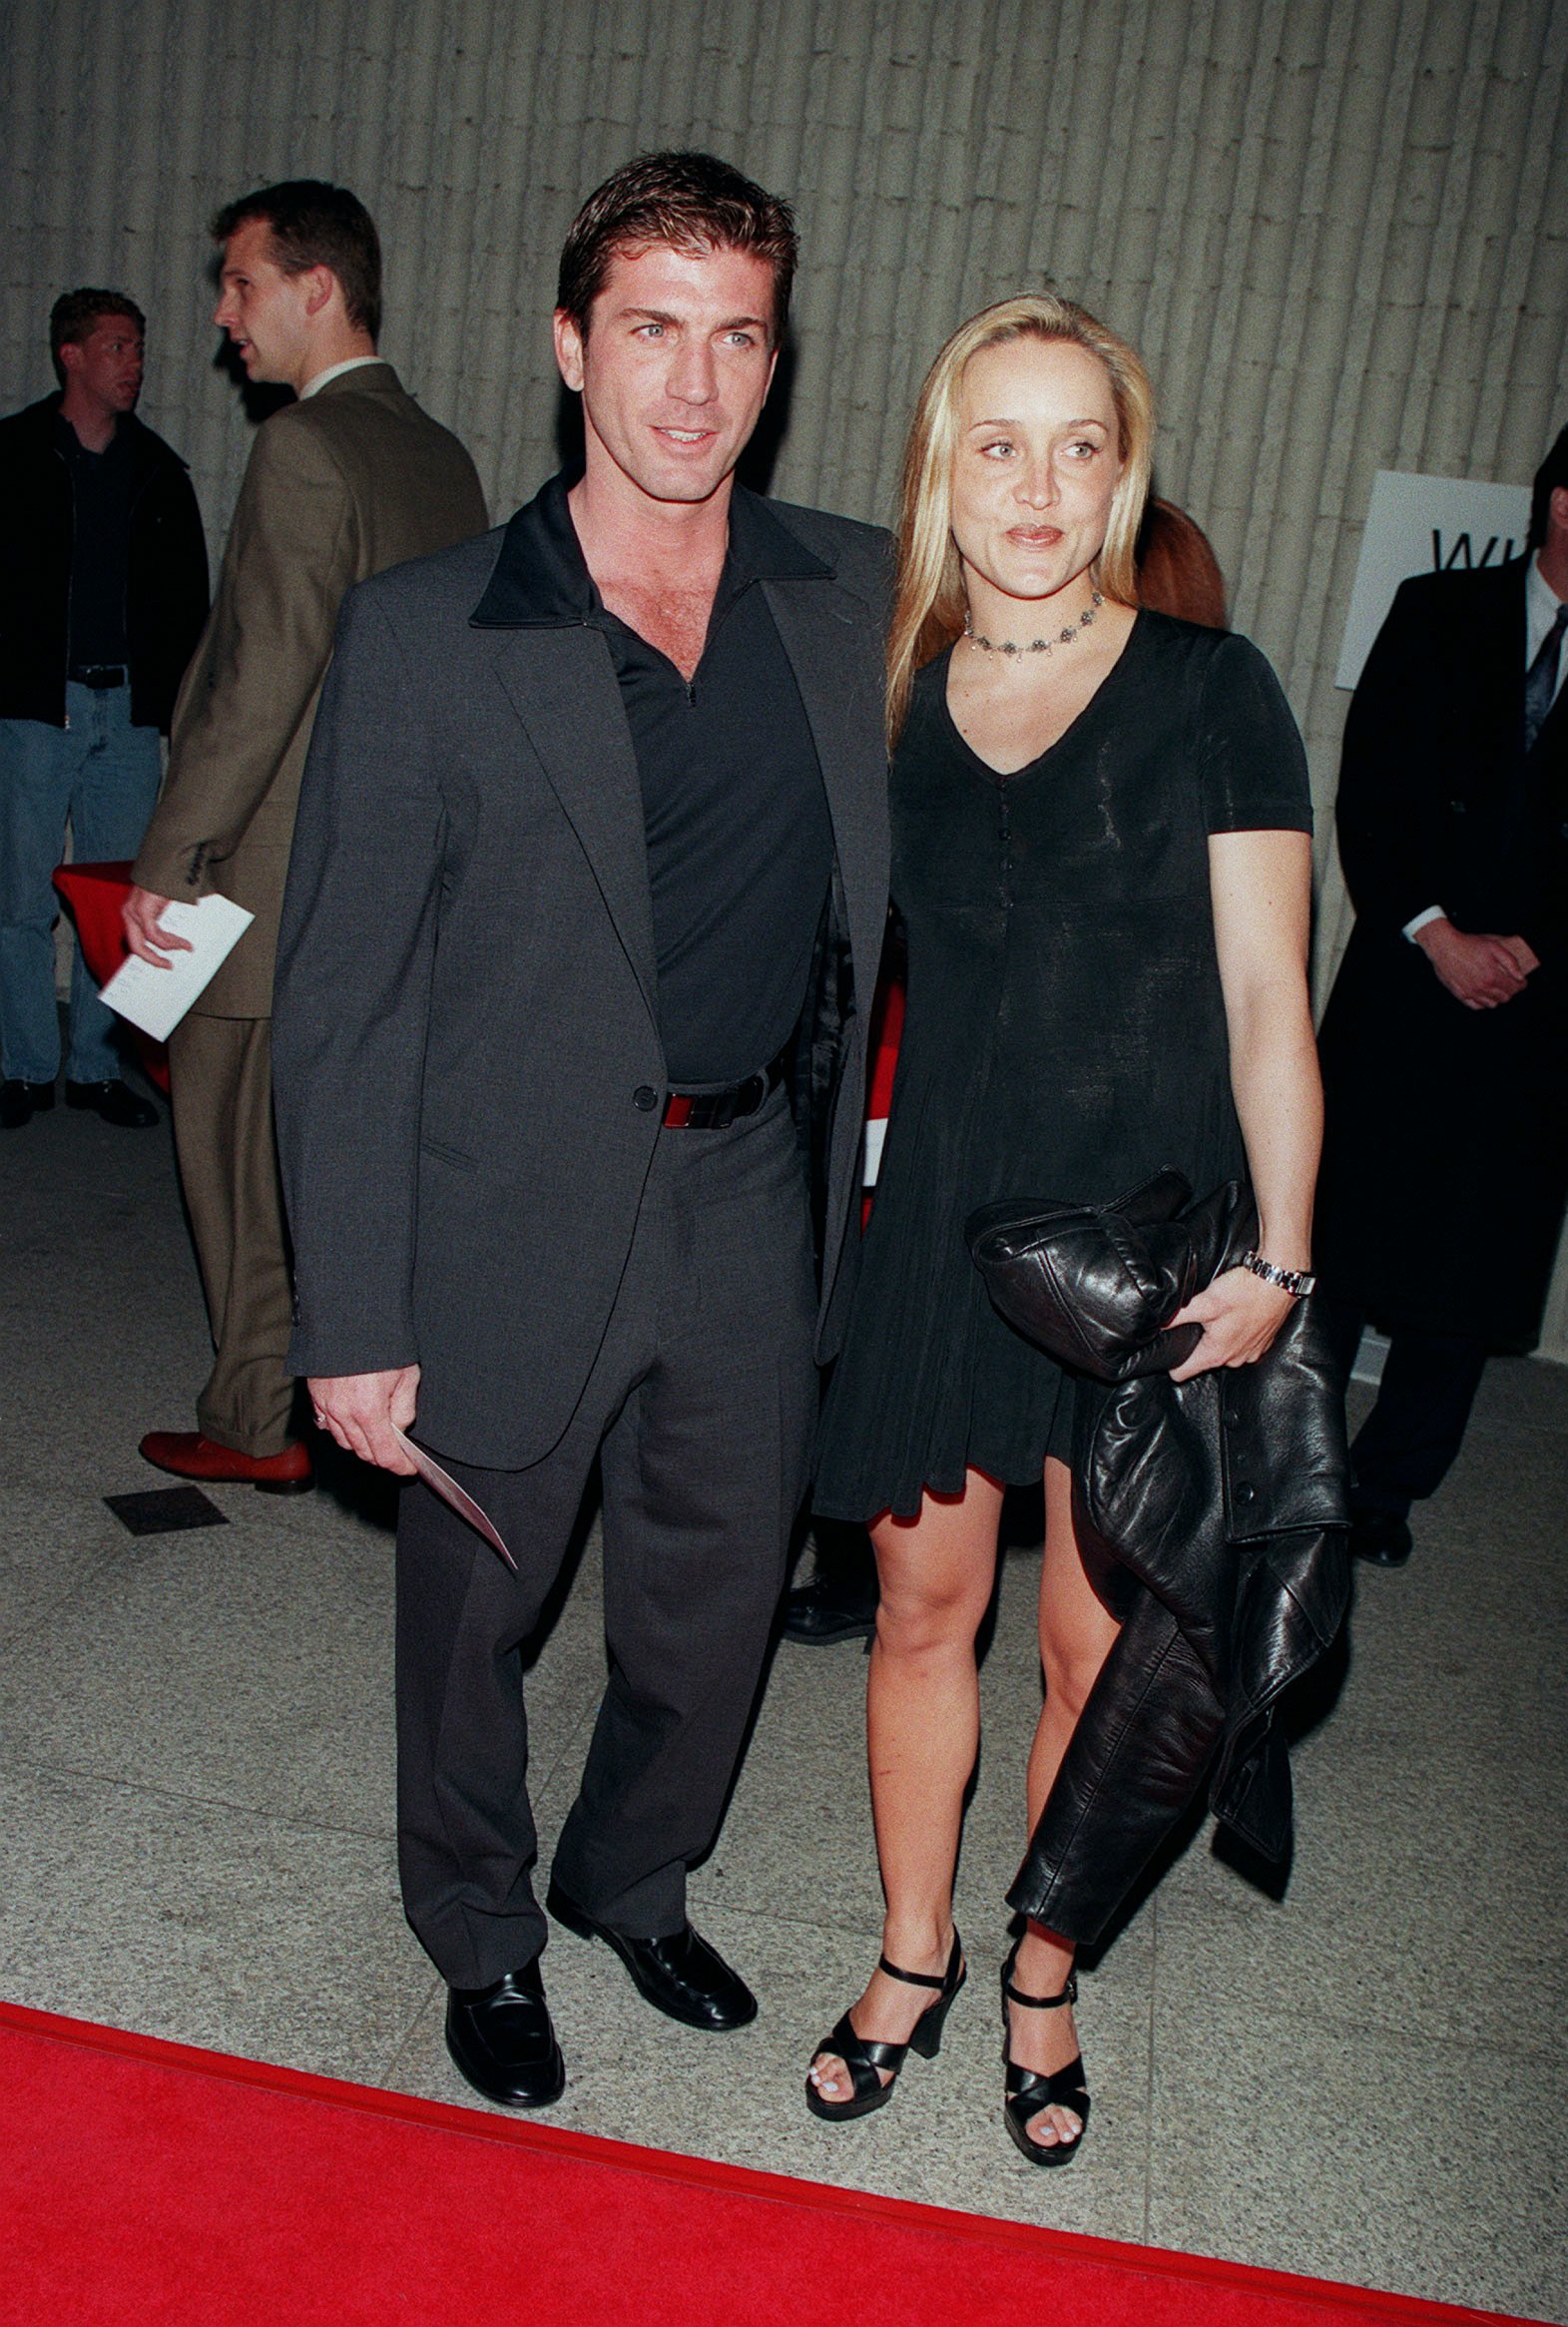 Joe Lando and Kirsten Barlow at the premiere of "The Object of My Affection" on April 9, 1998, in Los Angeles | Source: Getty Images